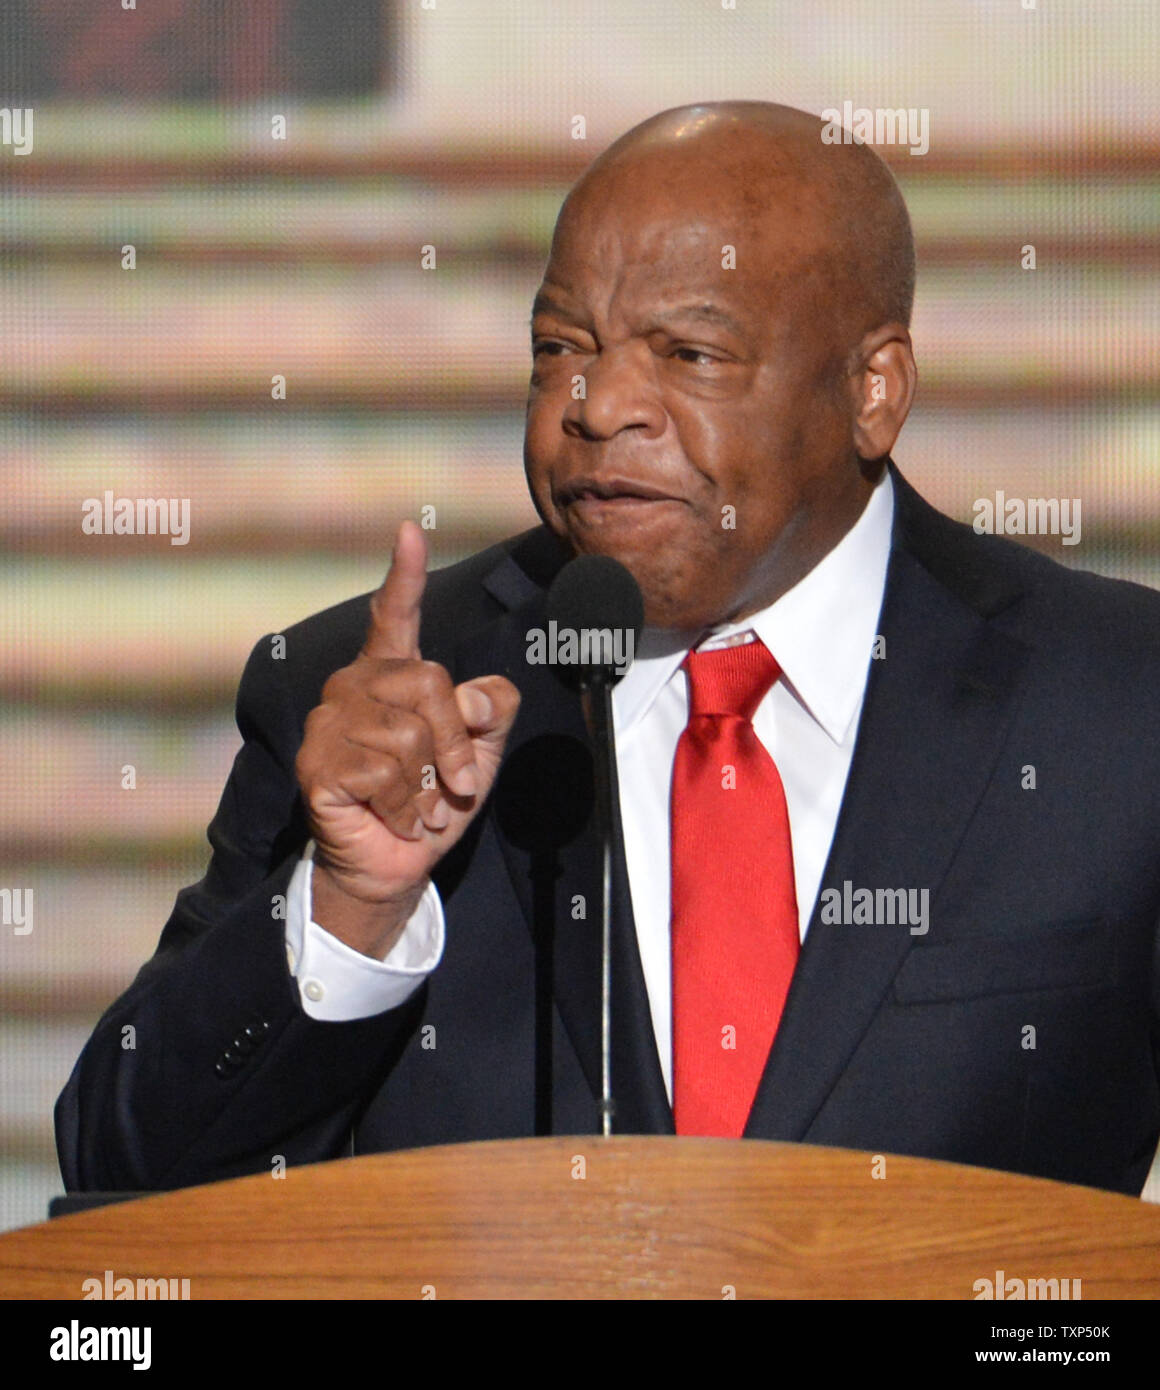 Representative John Lewis of Georgia speaks at the 2012 Democratic National Convention at the Time Warner Cable Arena in Charlotte, North Carolina on September 6, 2012.          UPI/Kevin Dietsch Stock Photo